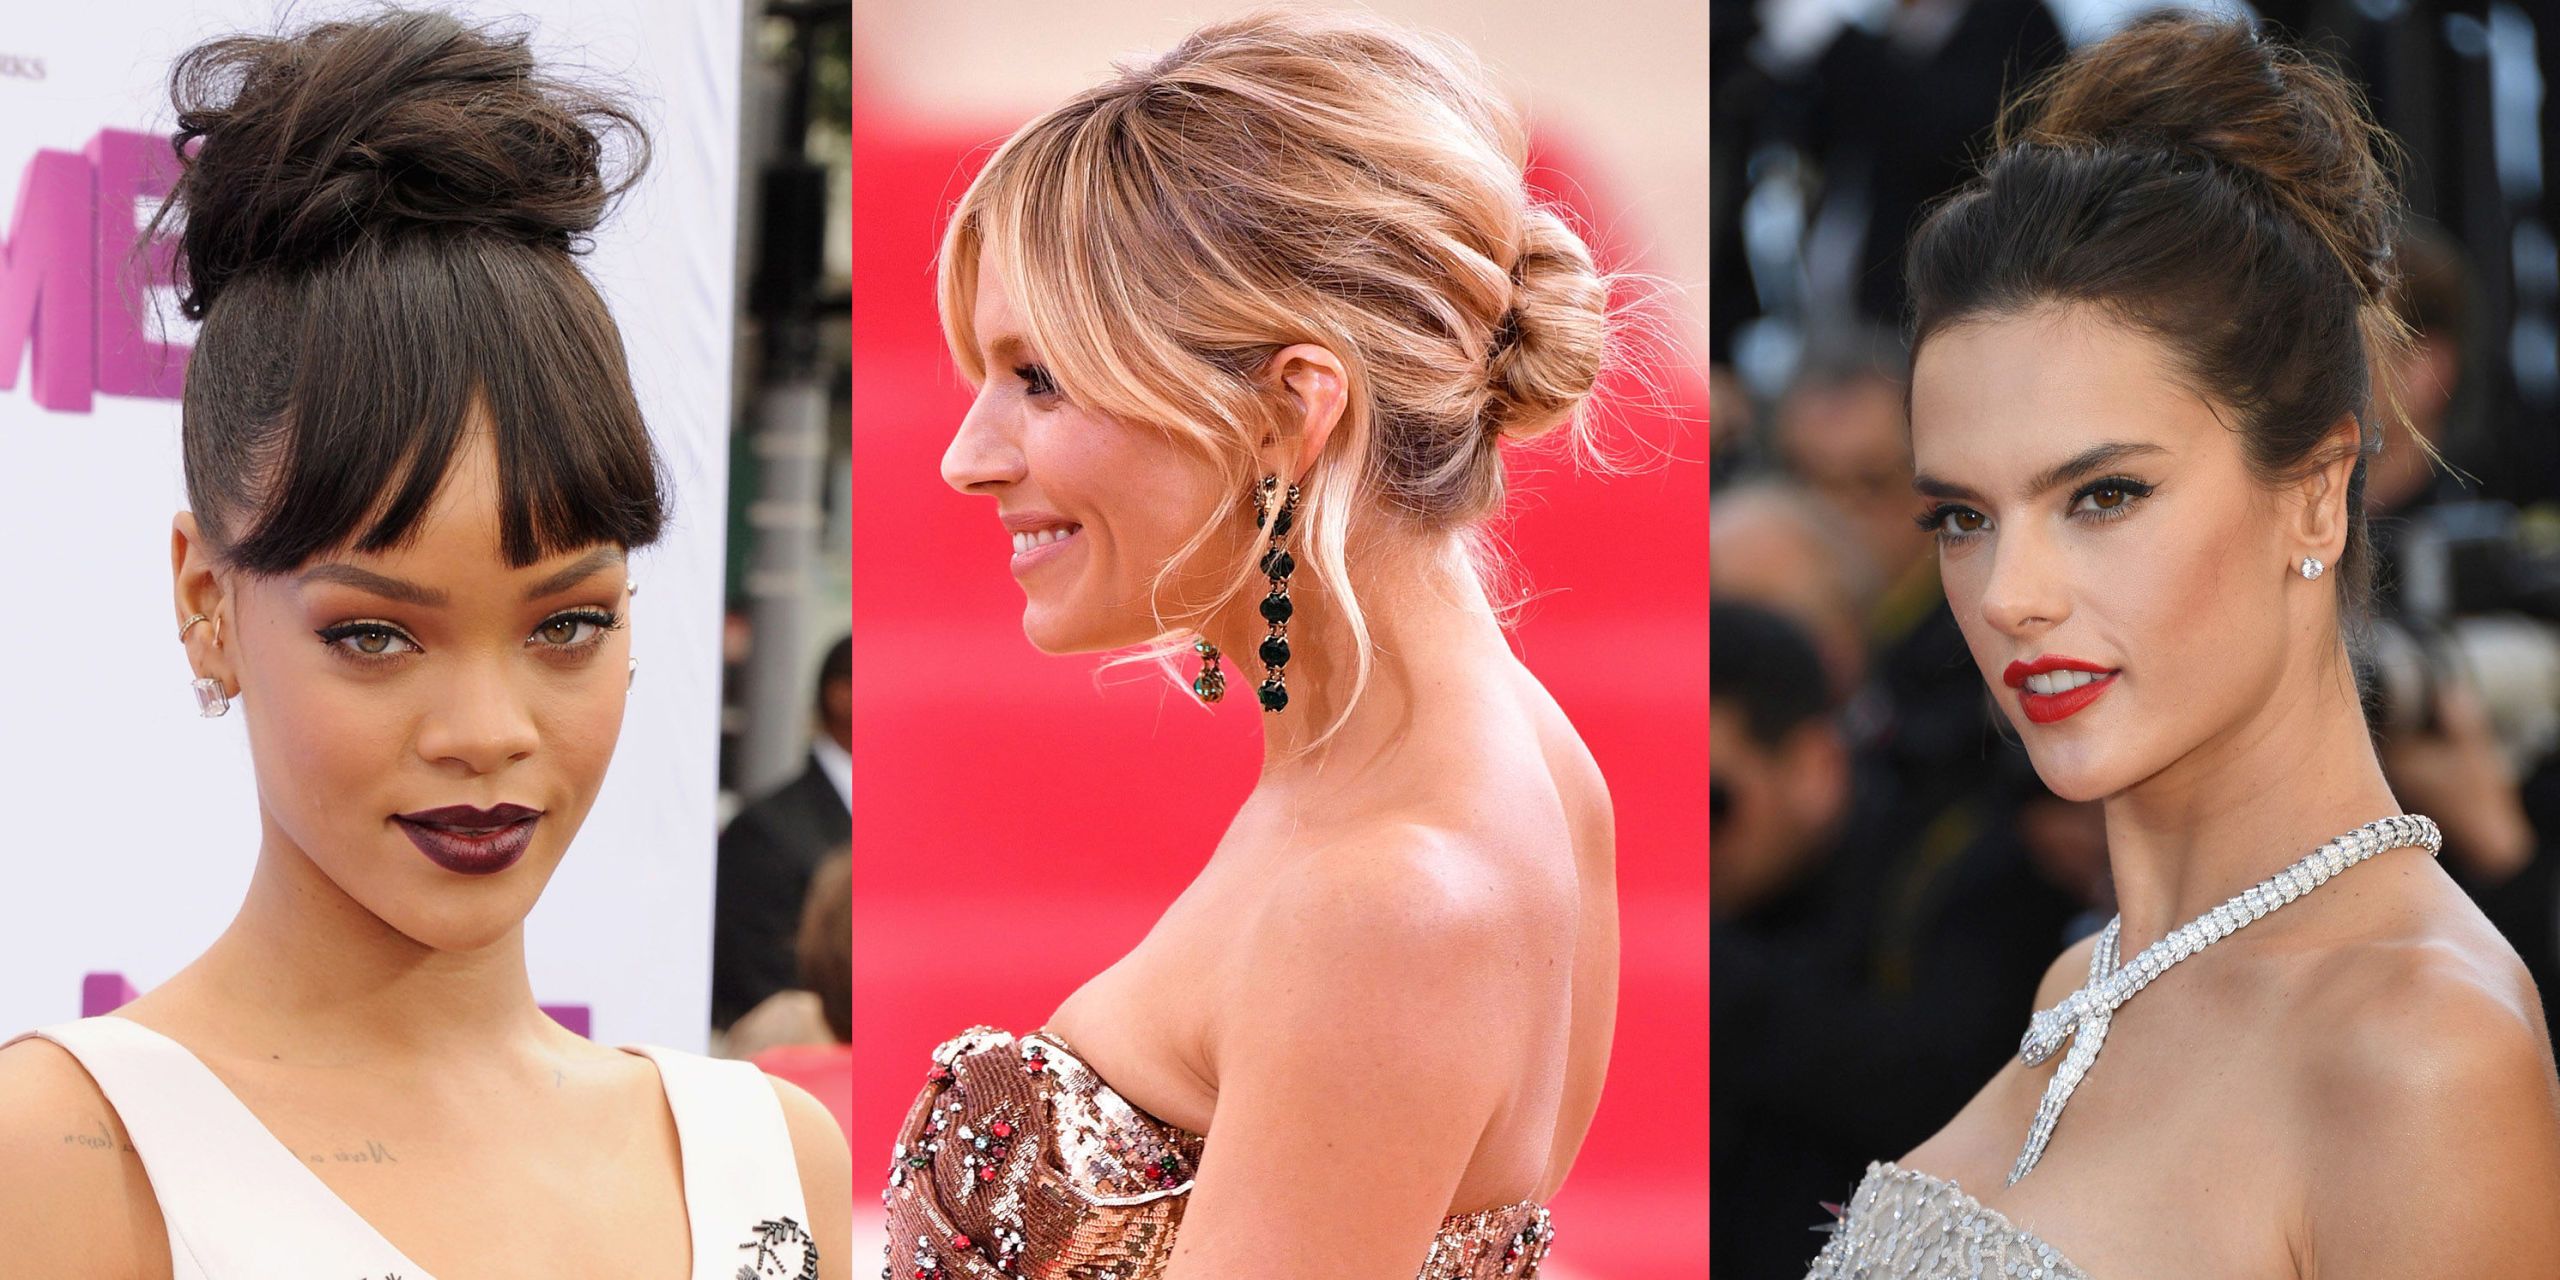 54 Cute Updo Hairstyles That Are Trendy for 2021 : Low loose buns